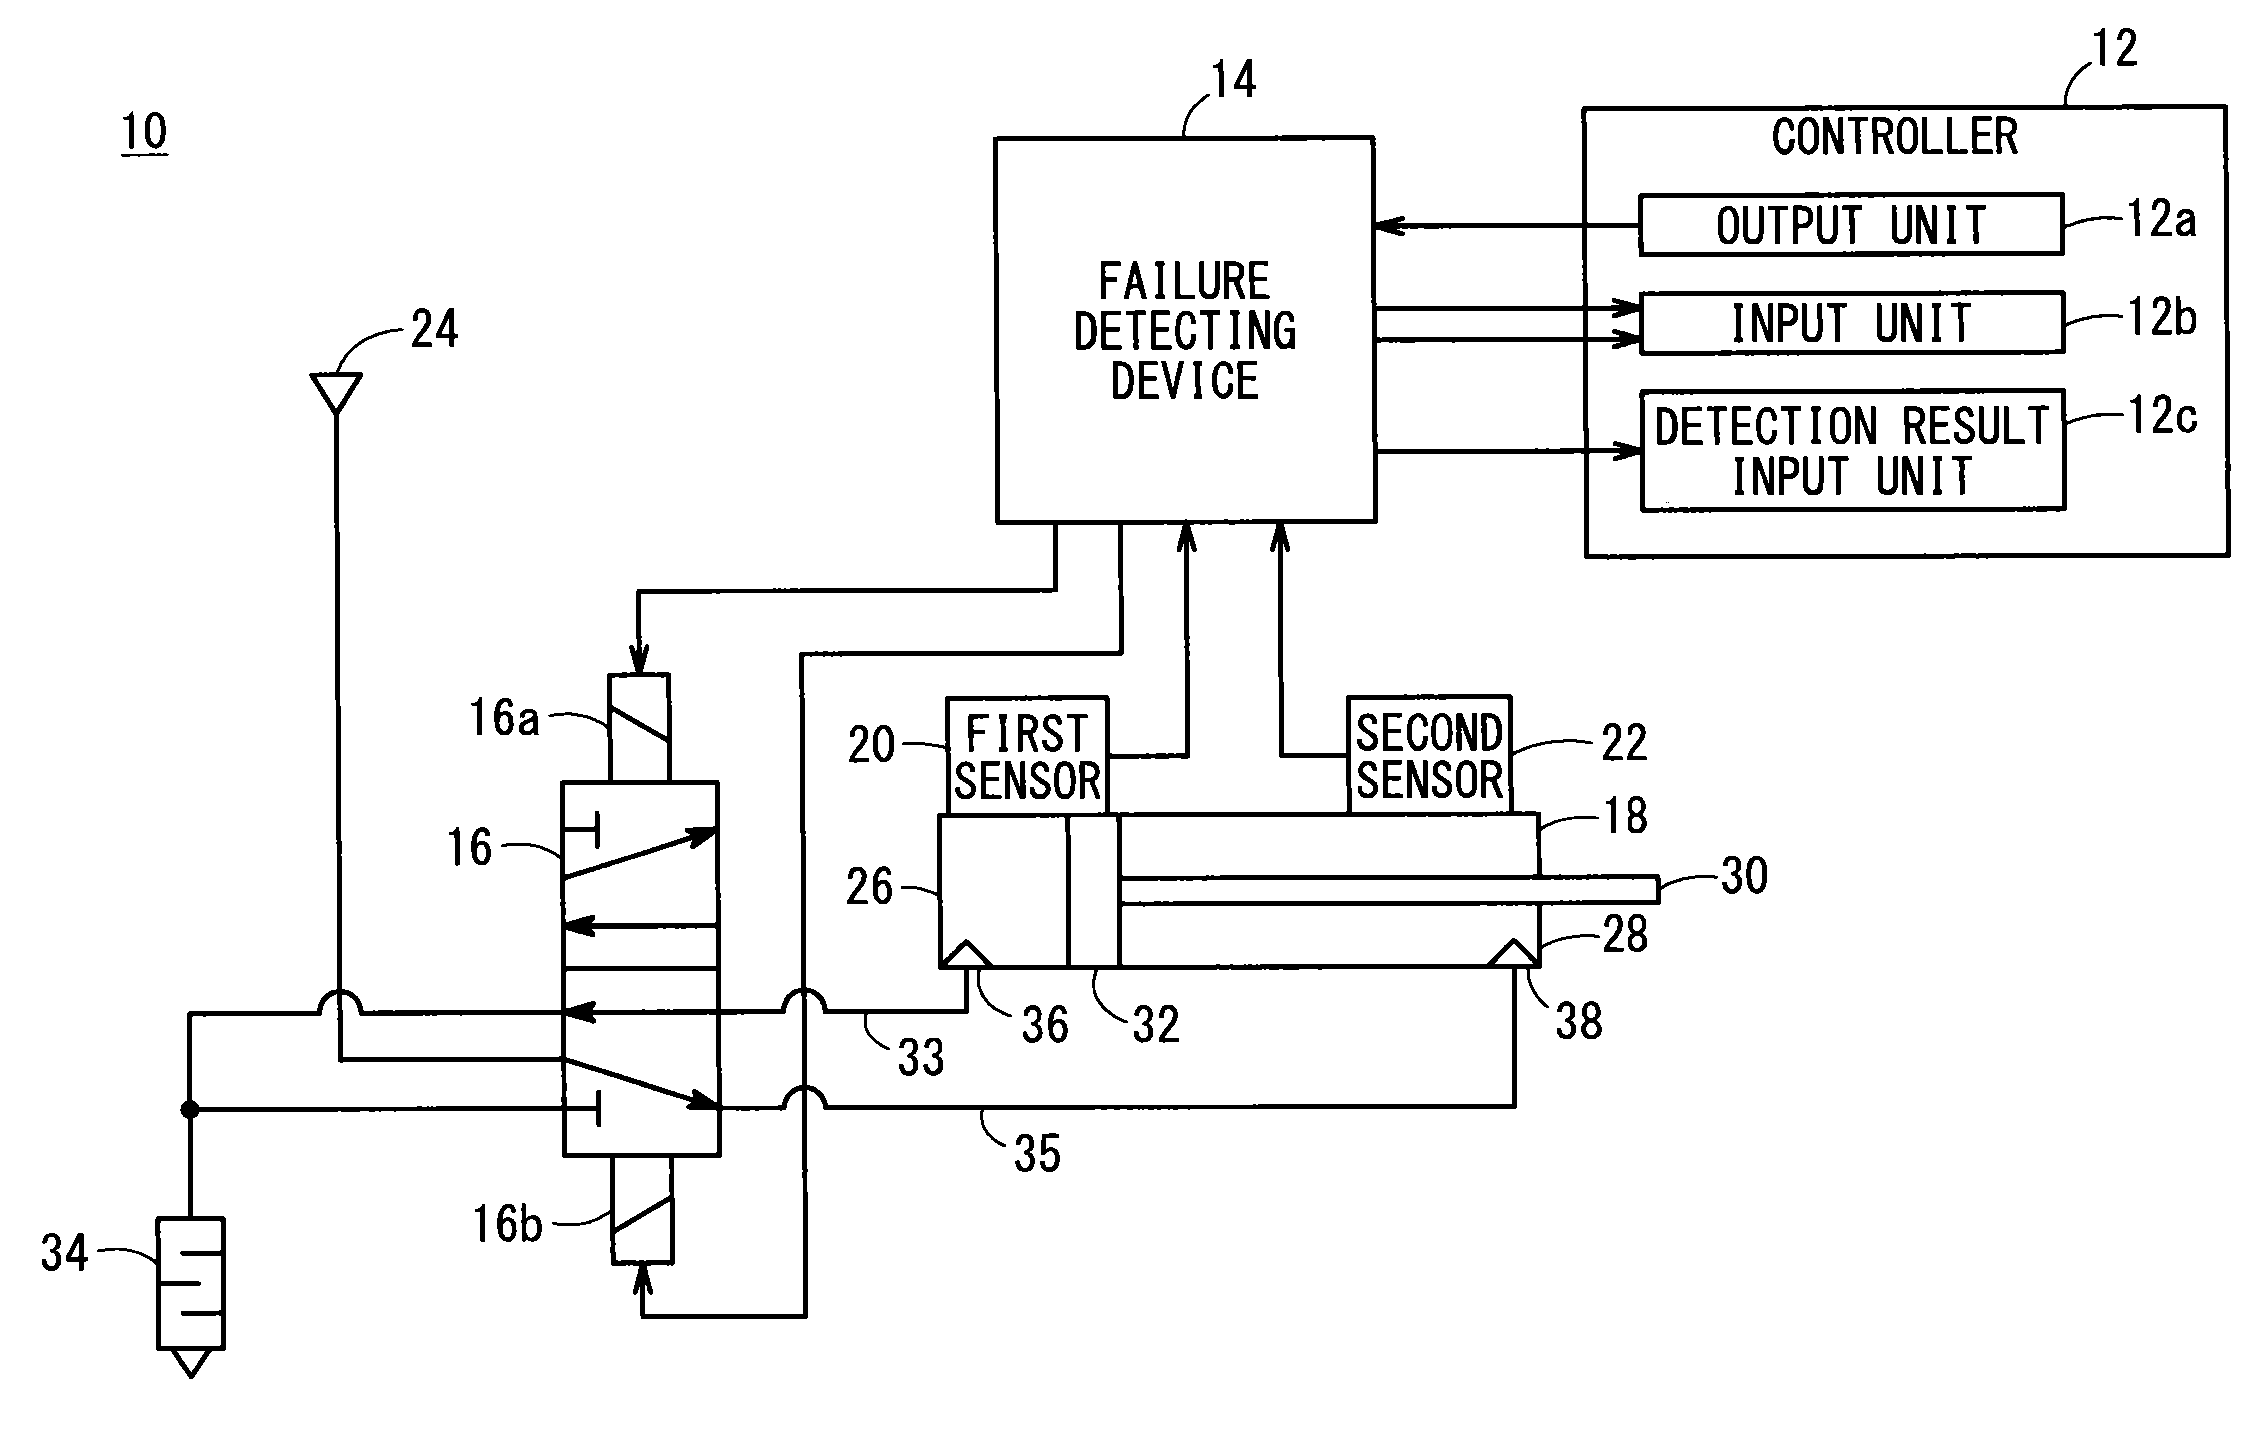 Fault detection system for actuator